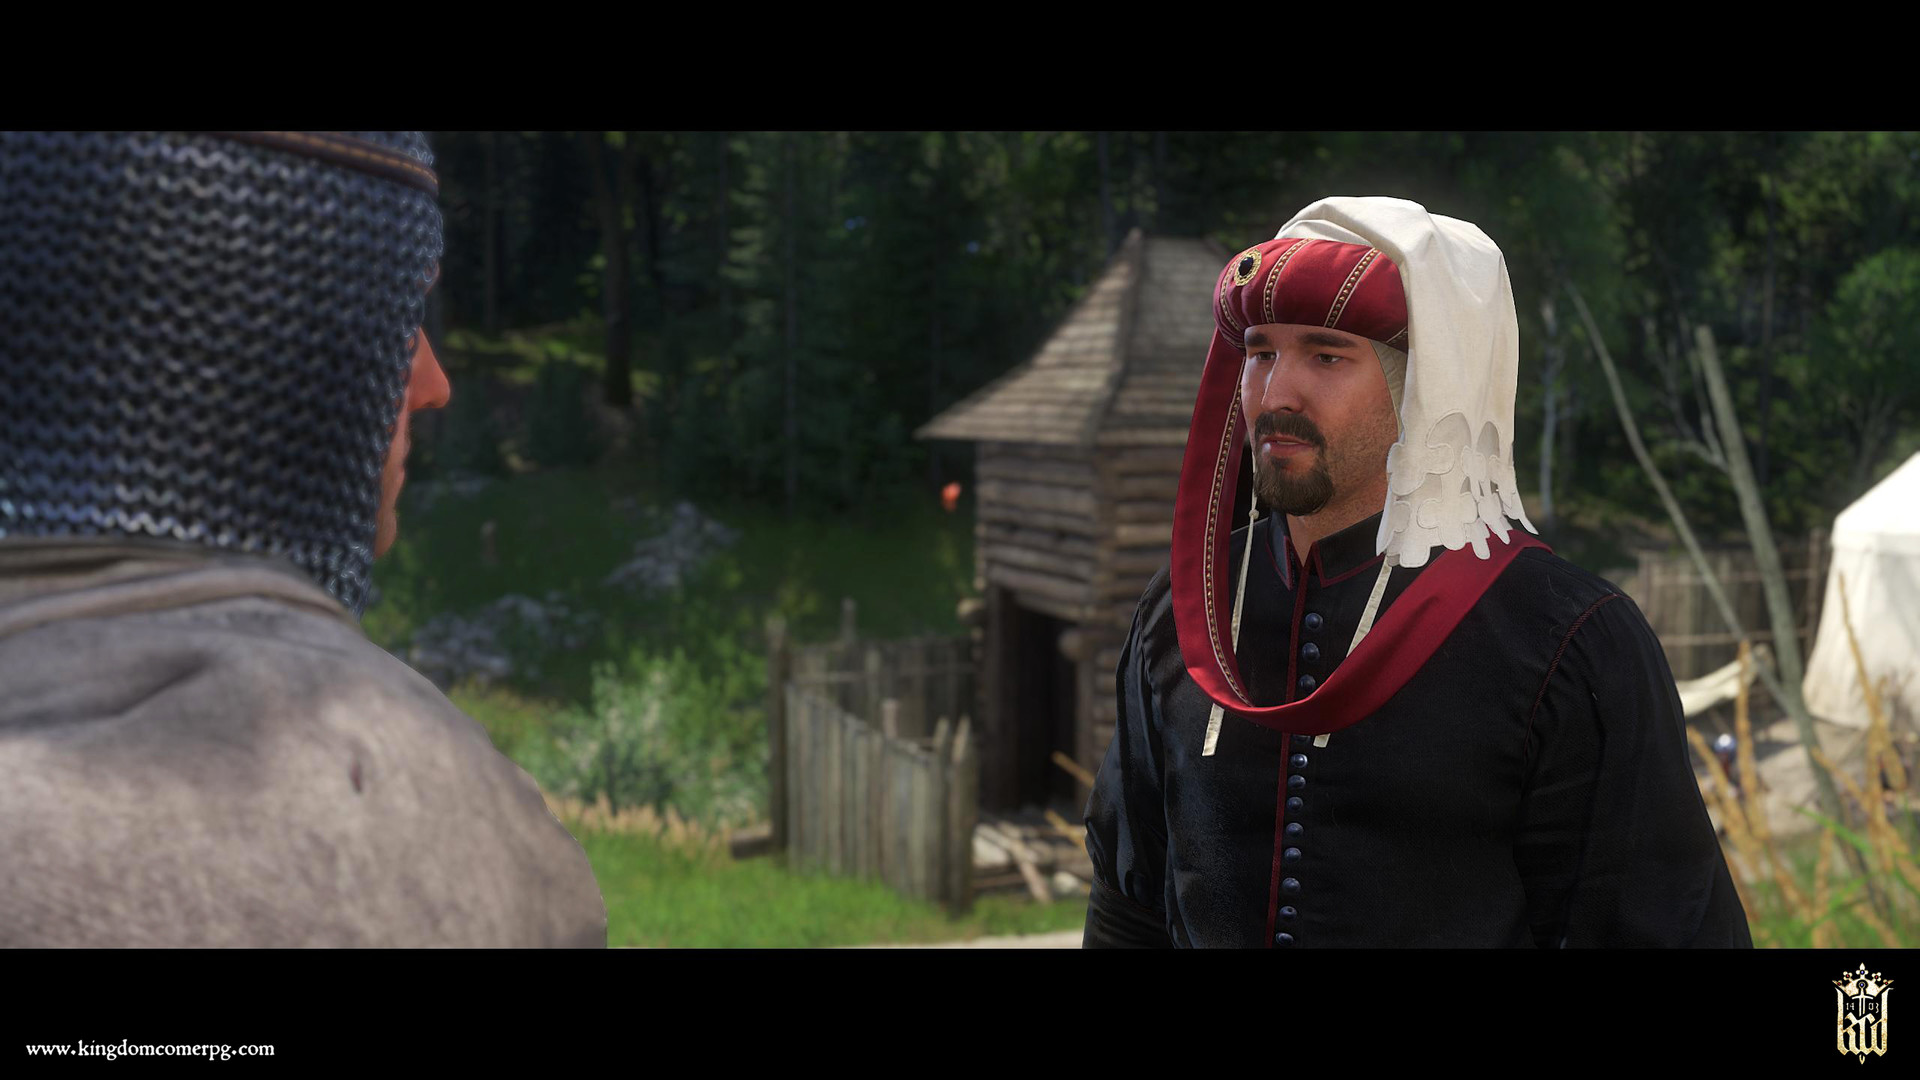 Kingdom Come: Deliverance – From the Ashes Featured Screenshot #1